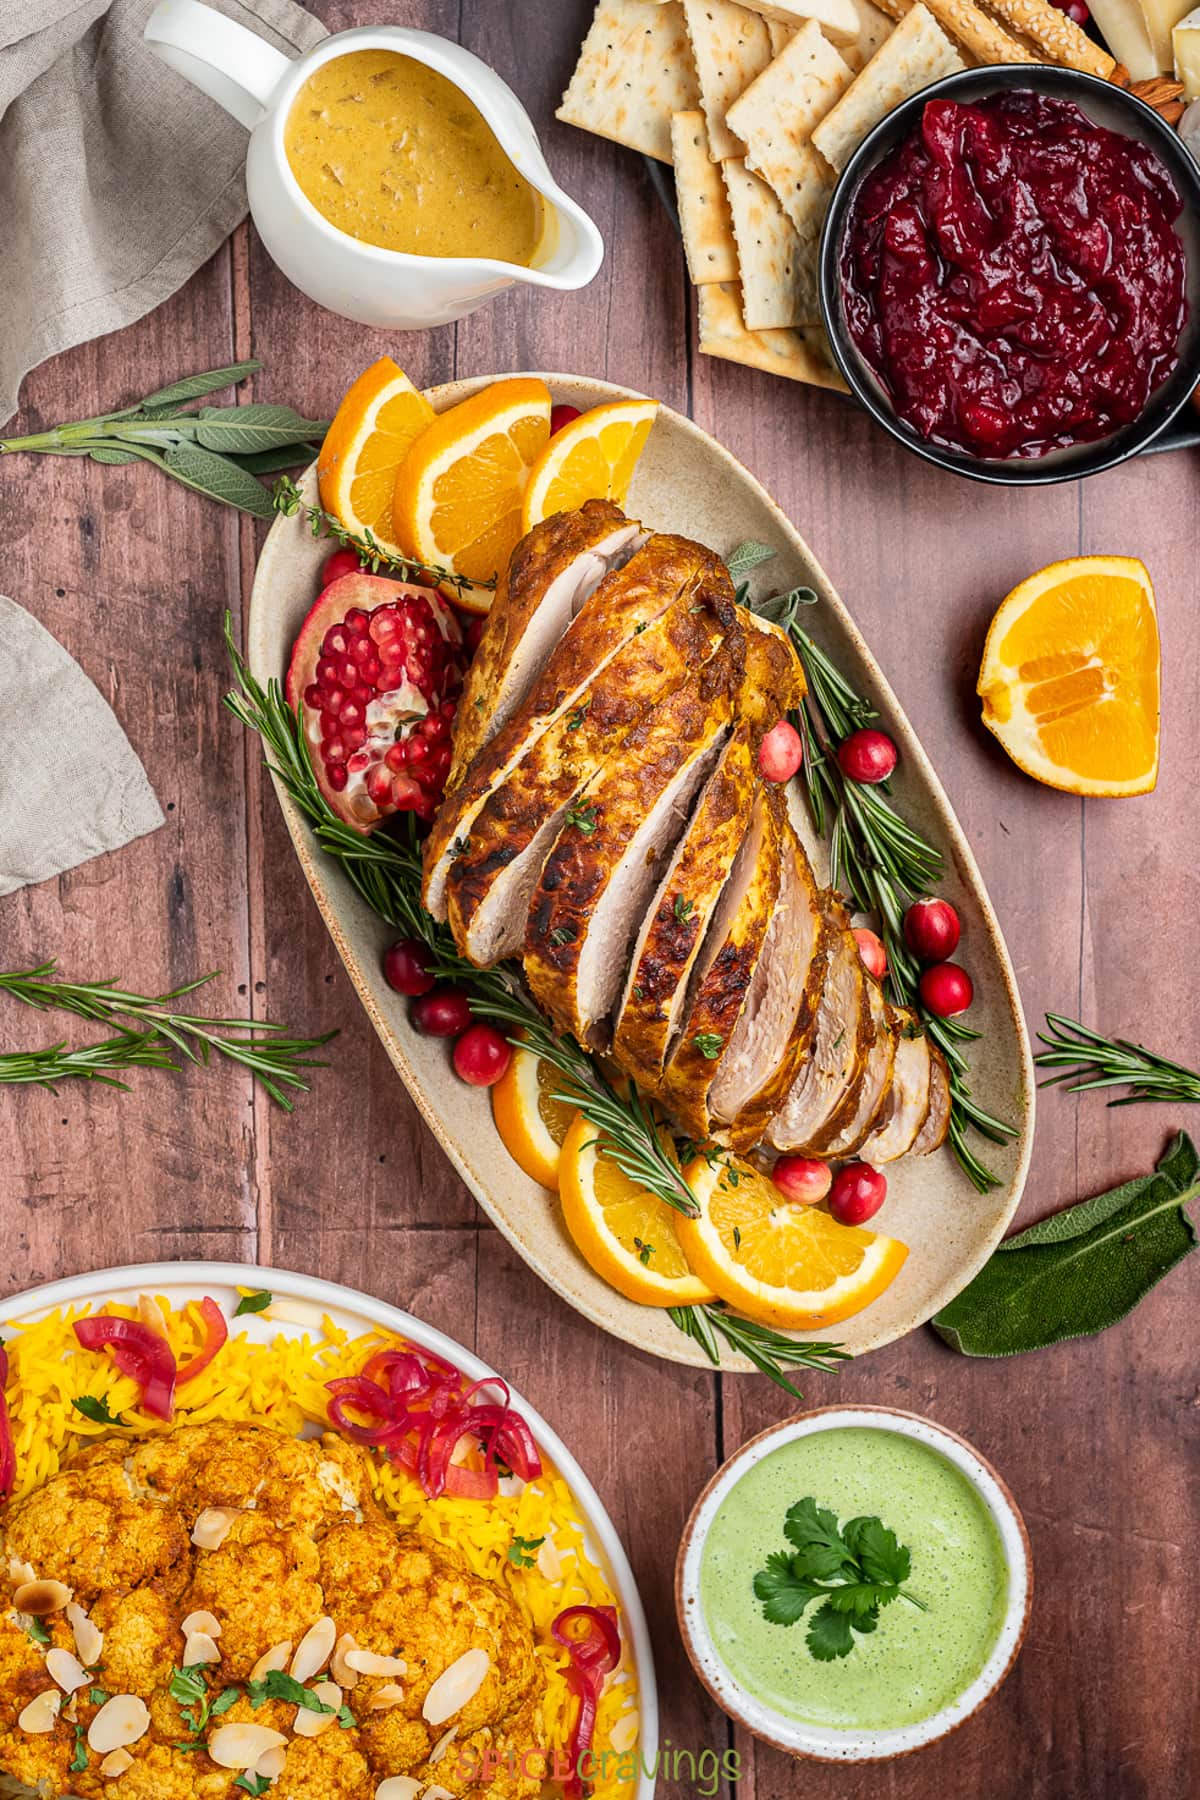 sliced turkey breast on platter with orange slices, cranberries and rosemary